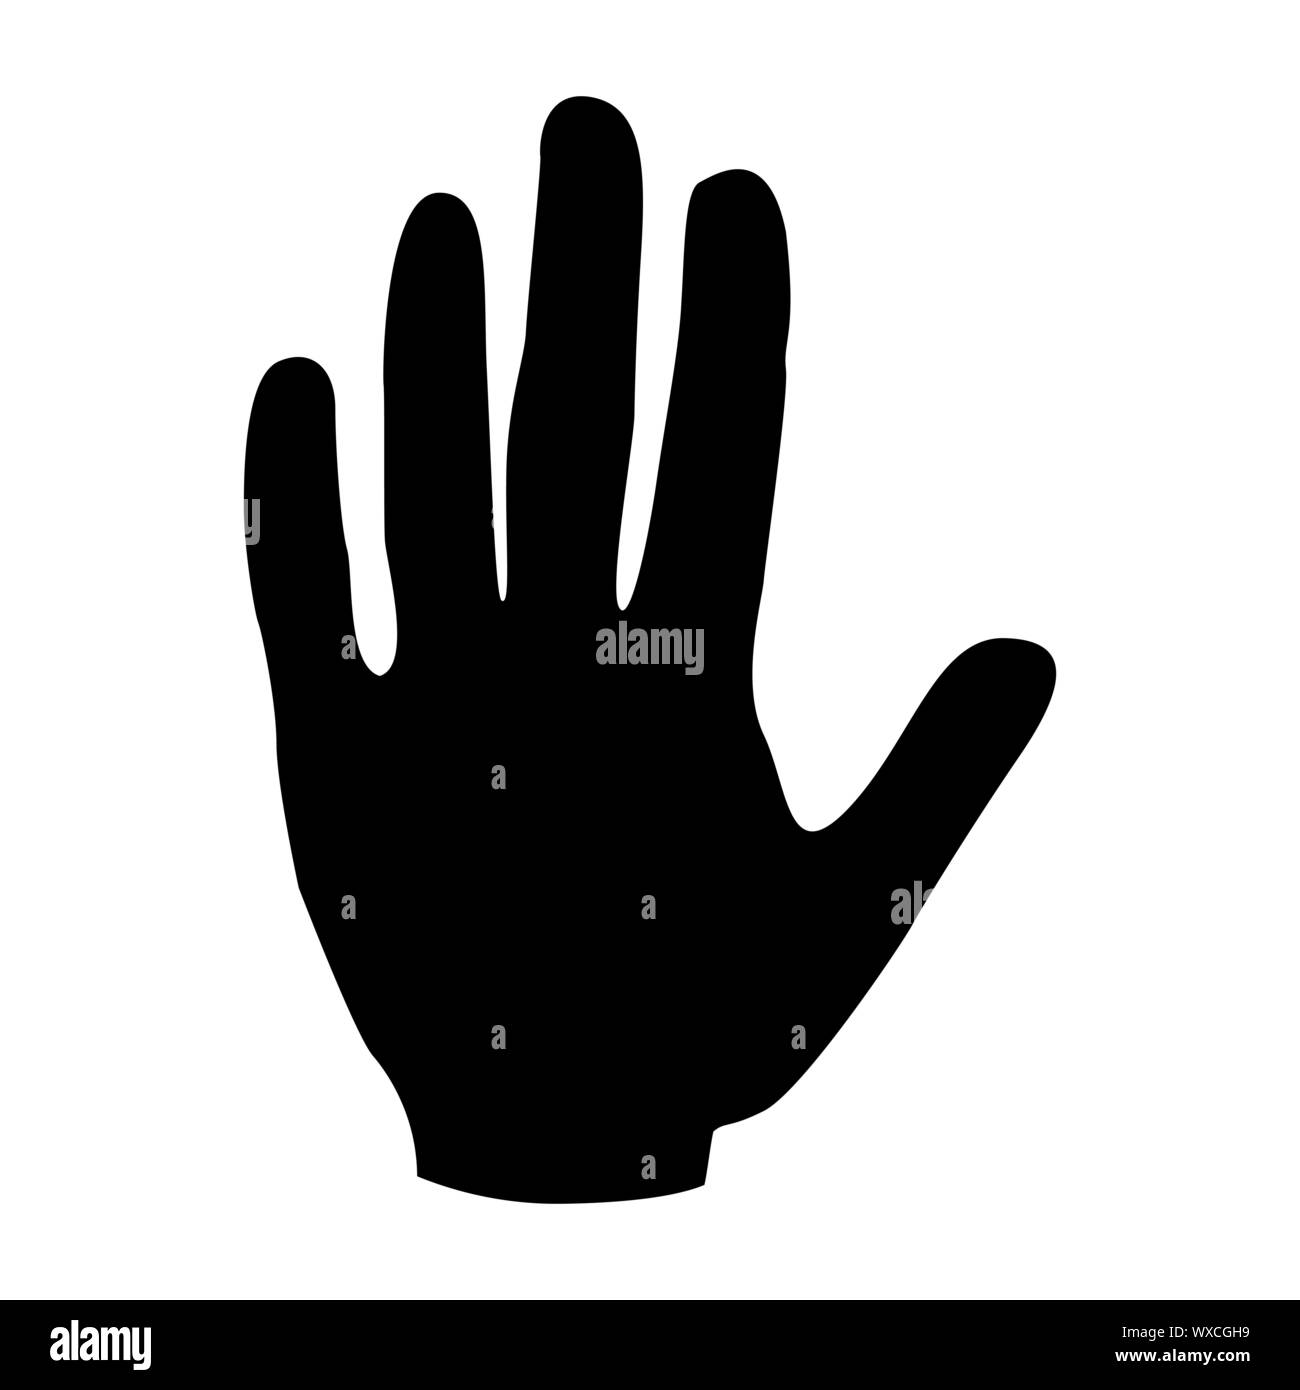 Palm silhouette. Black hands icon on a white background. Vector illustration Stock Vector